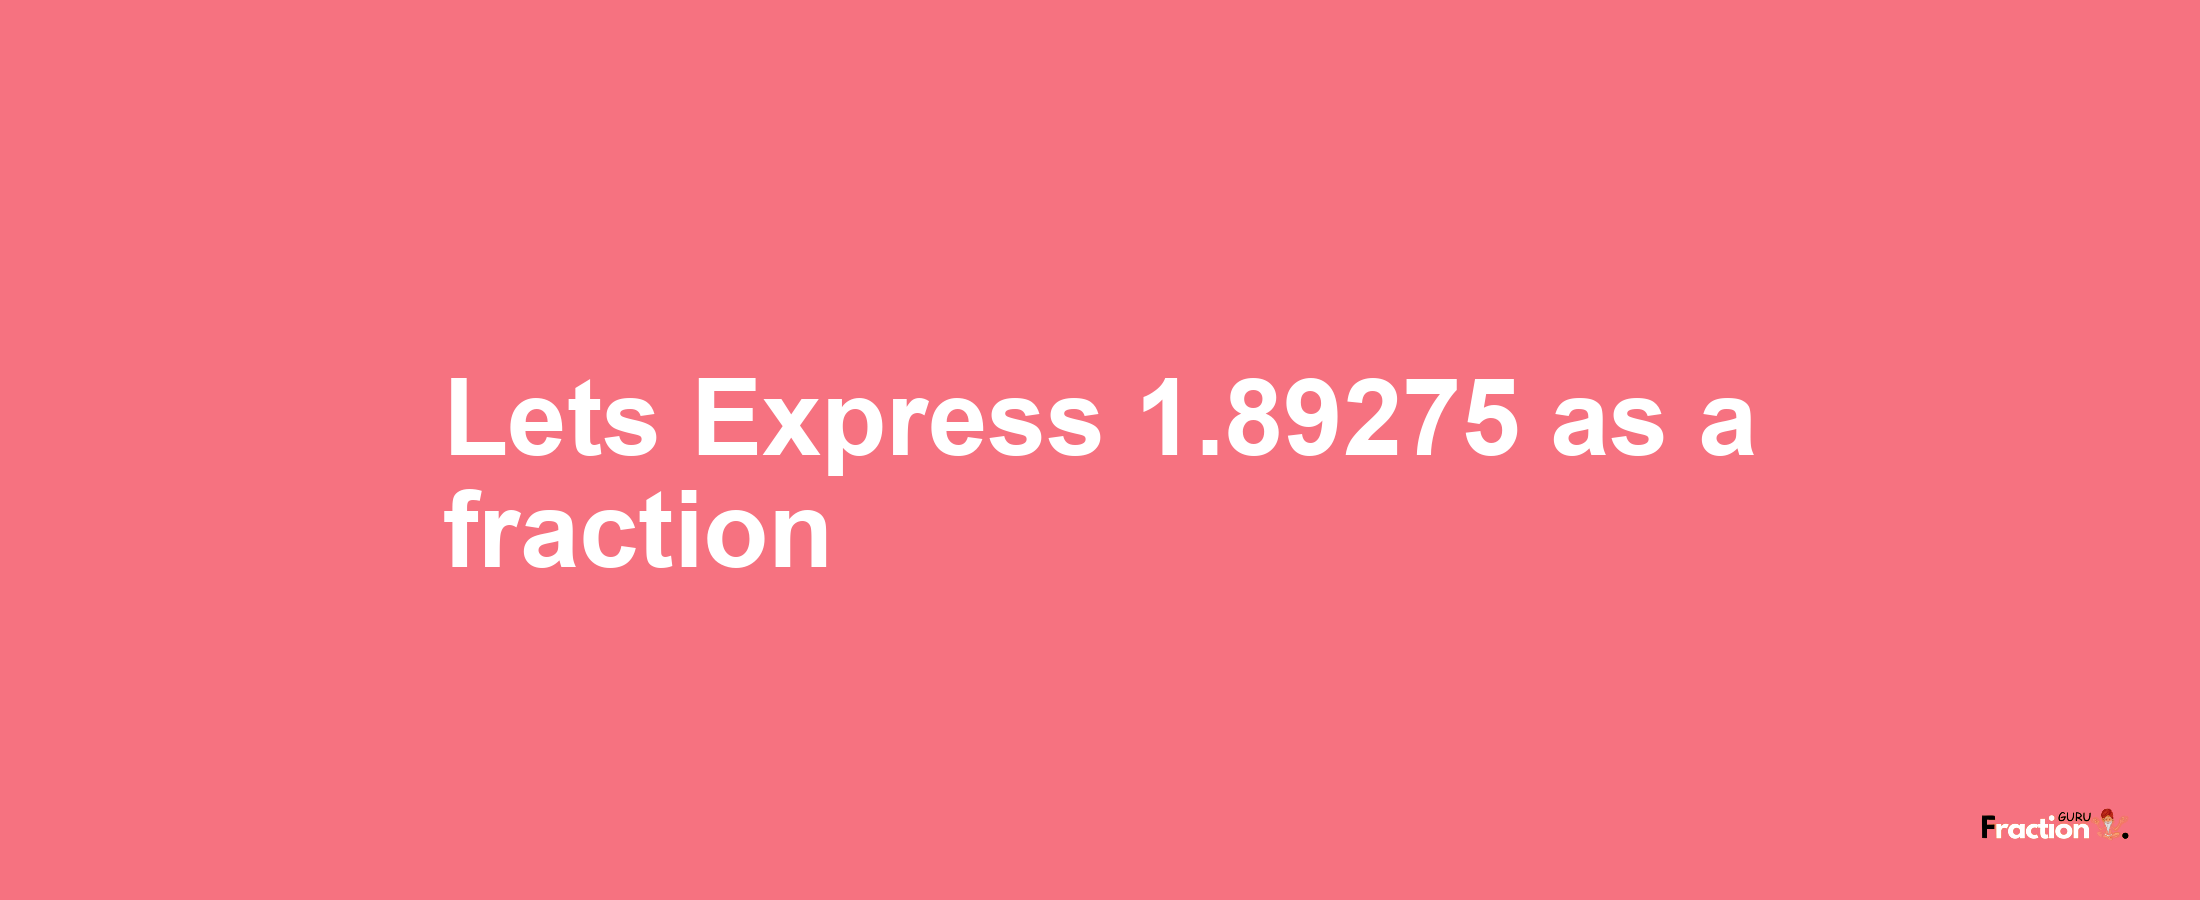 Lets Express 1.89275 as afraction